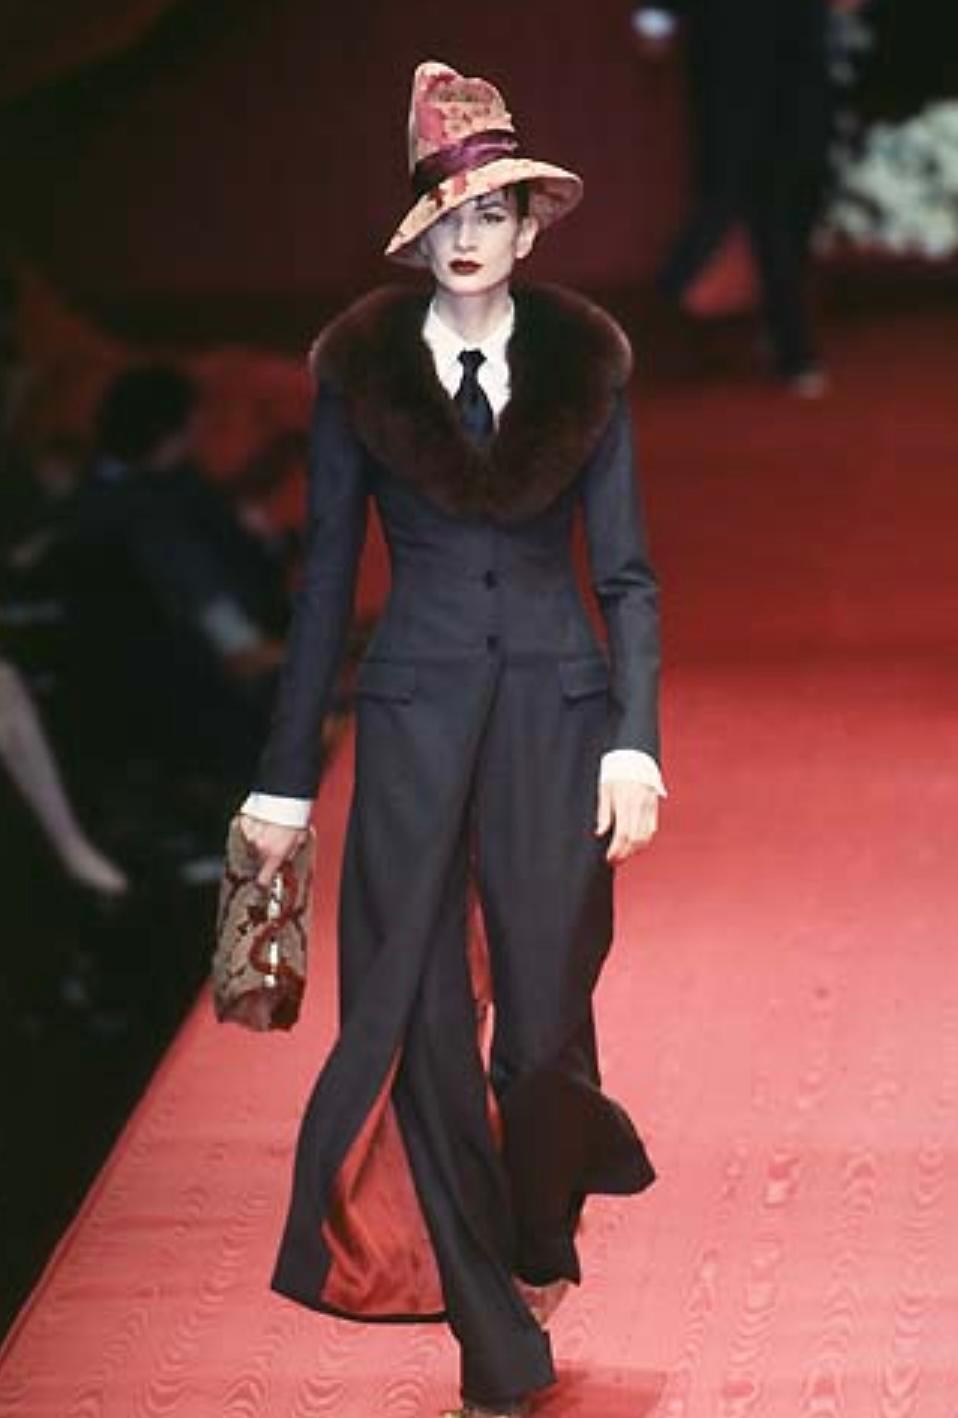 DOLCE & GABBANA FW 97 Rare Pinstripe Suit with Mink Collar For Sale 6